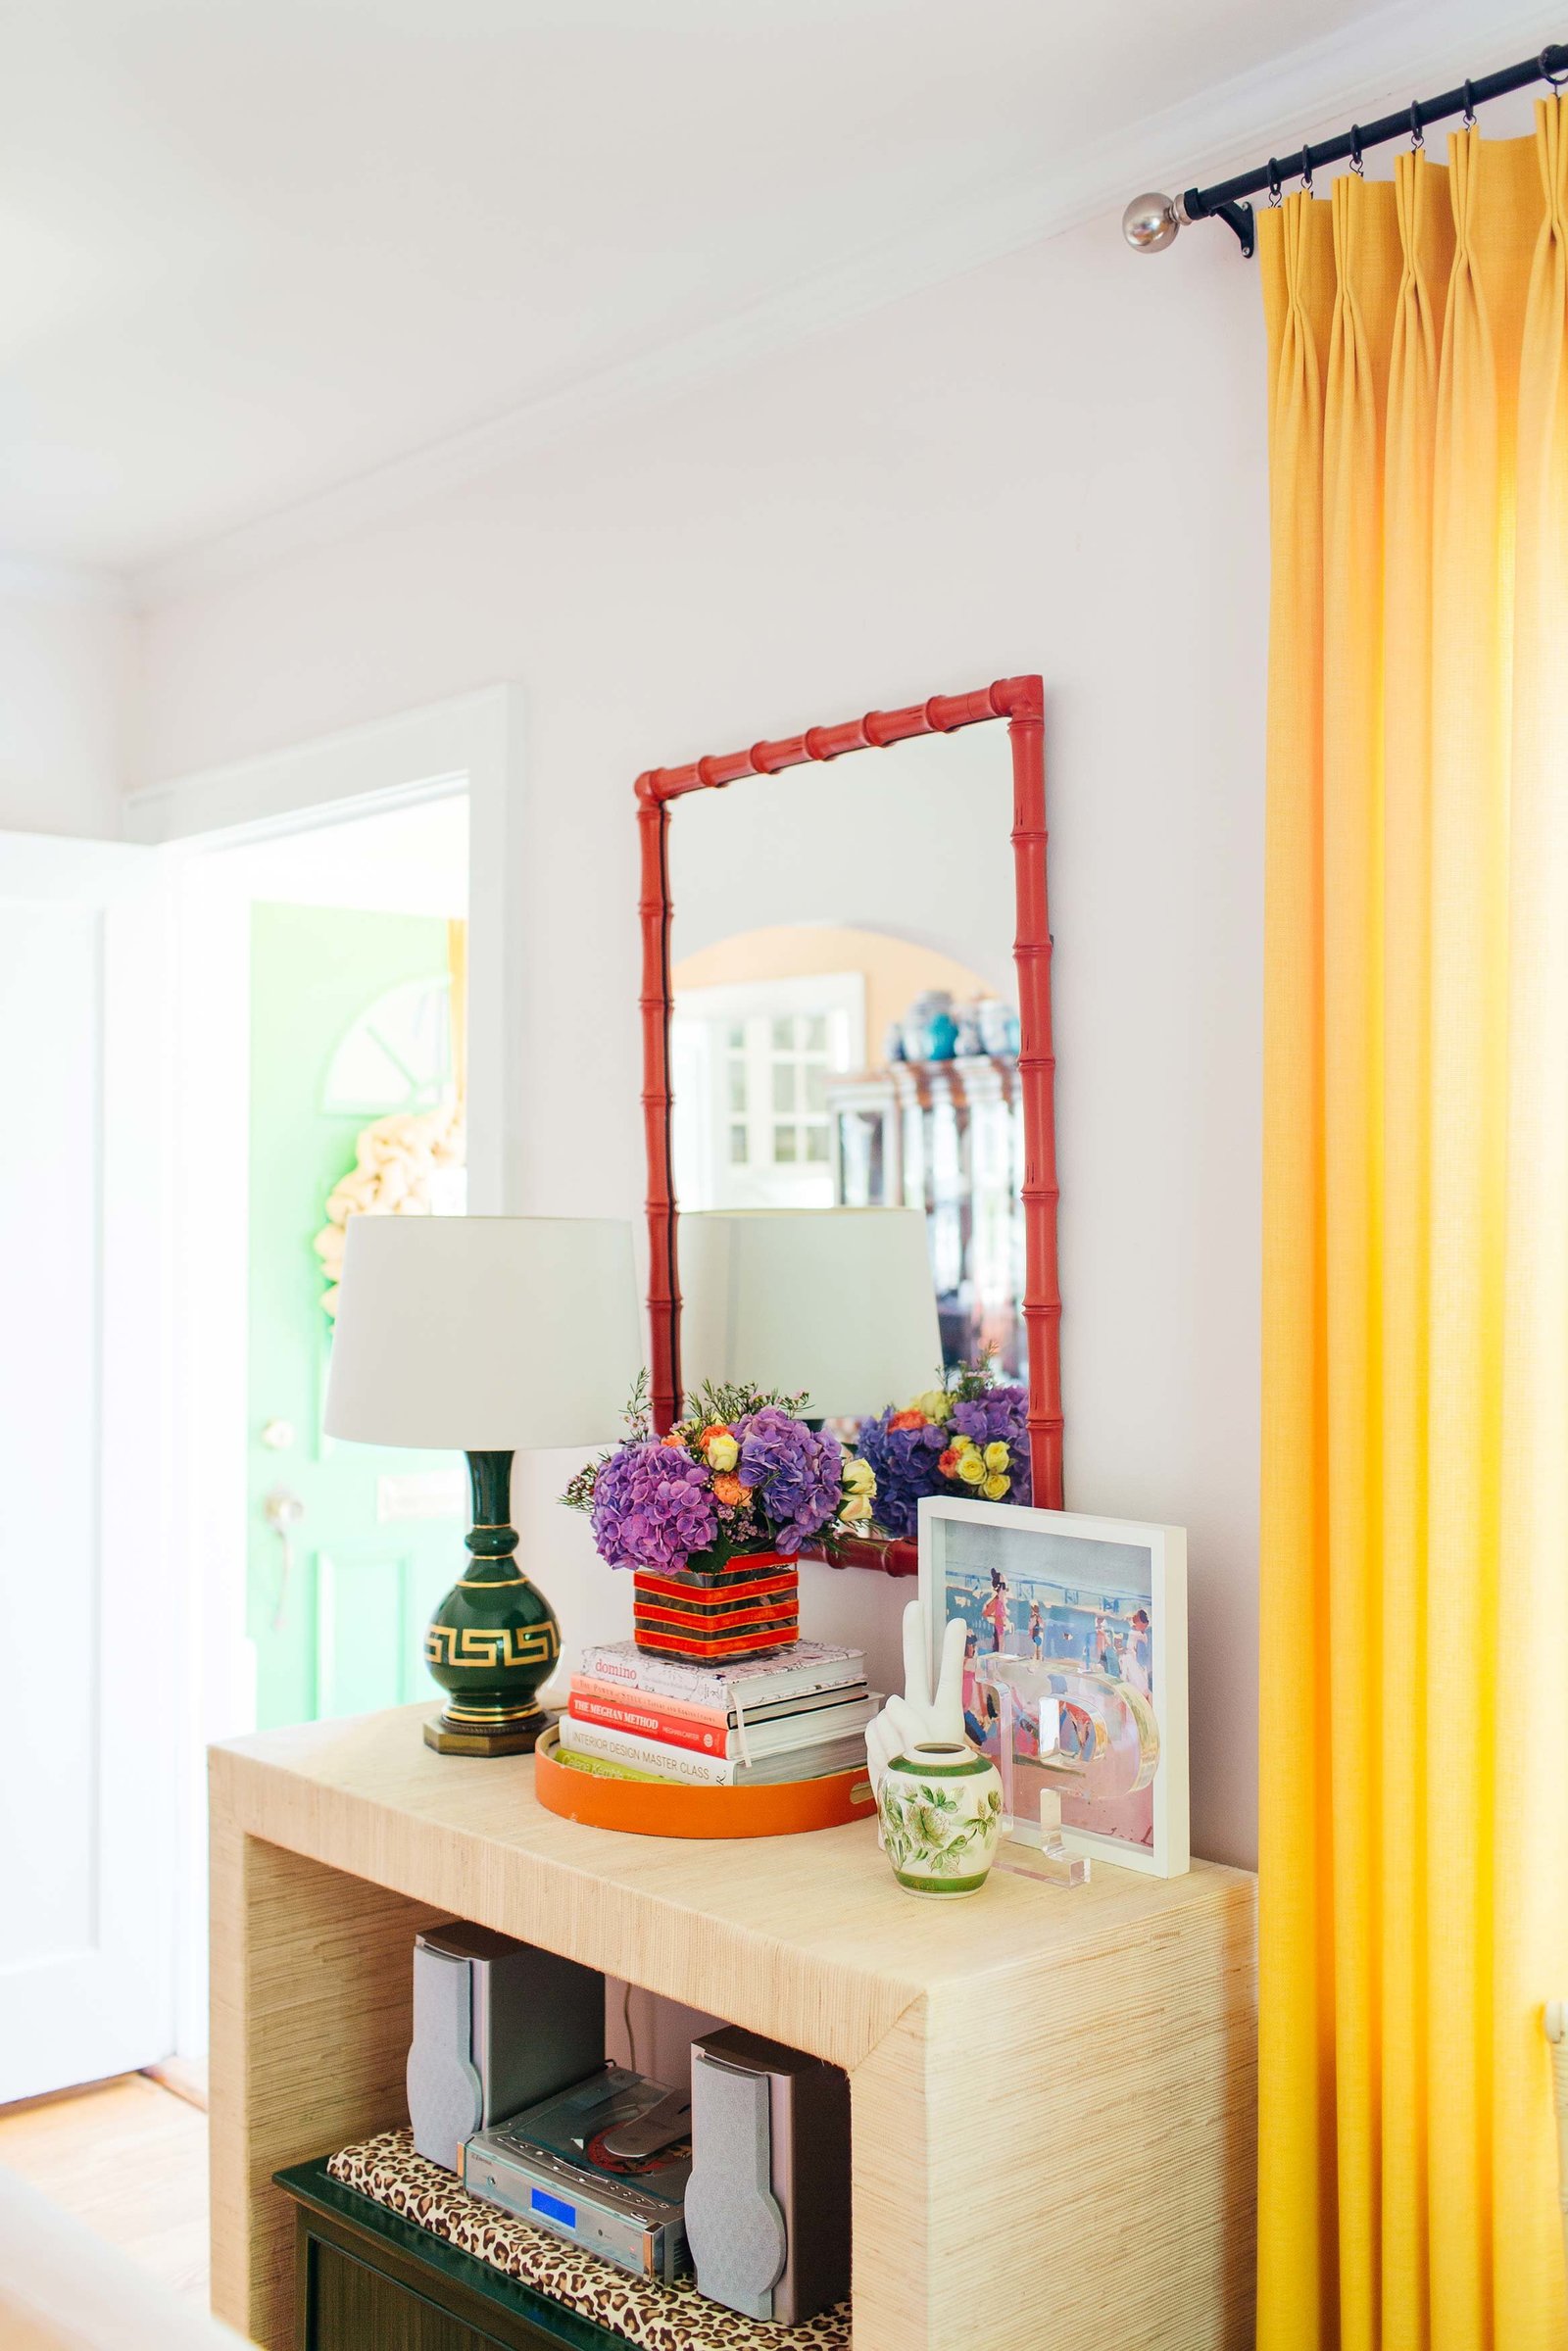 An entryway table with a lamp, mirror, and accessories.